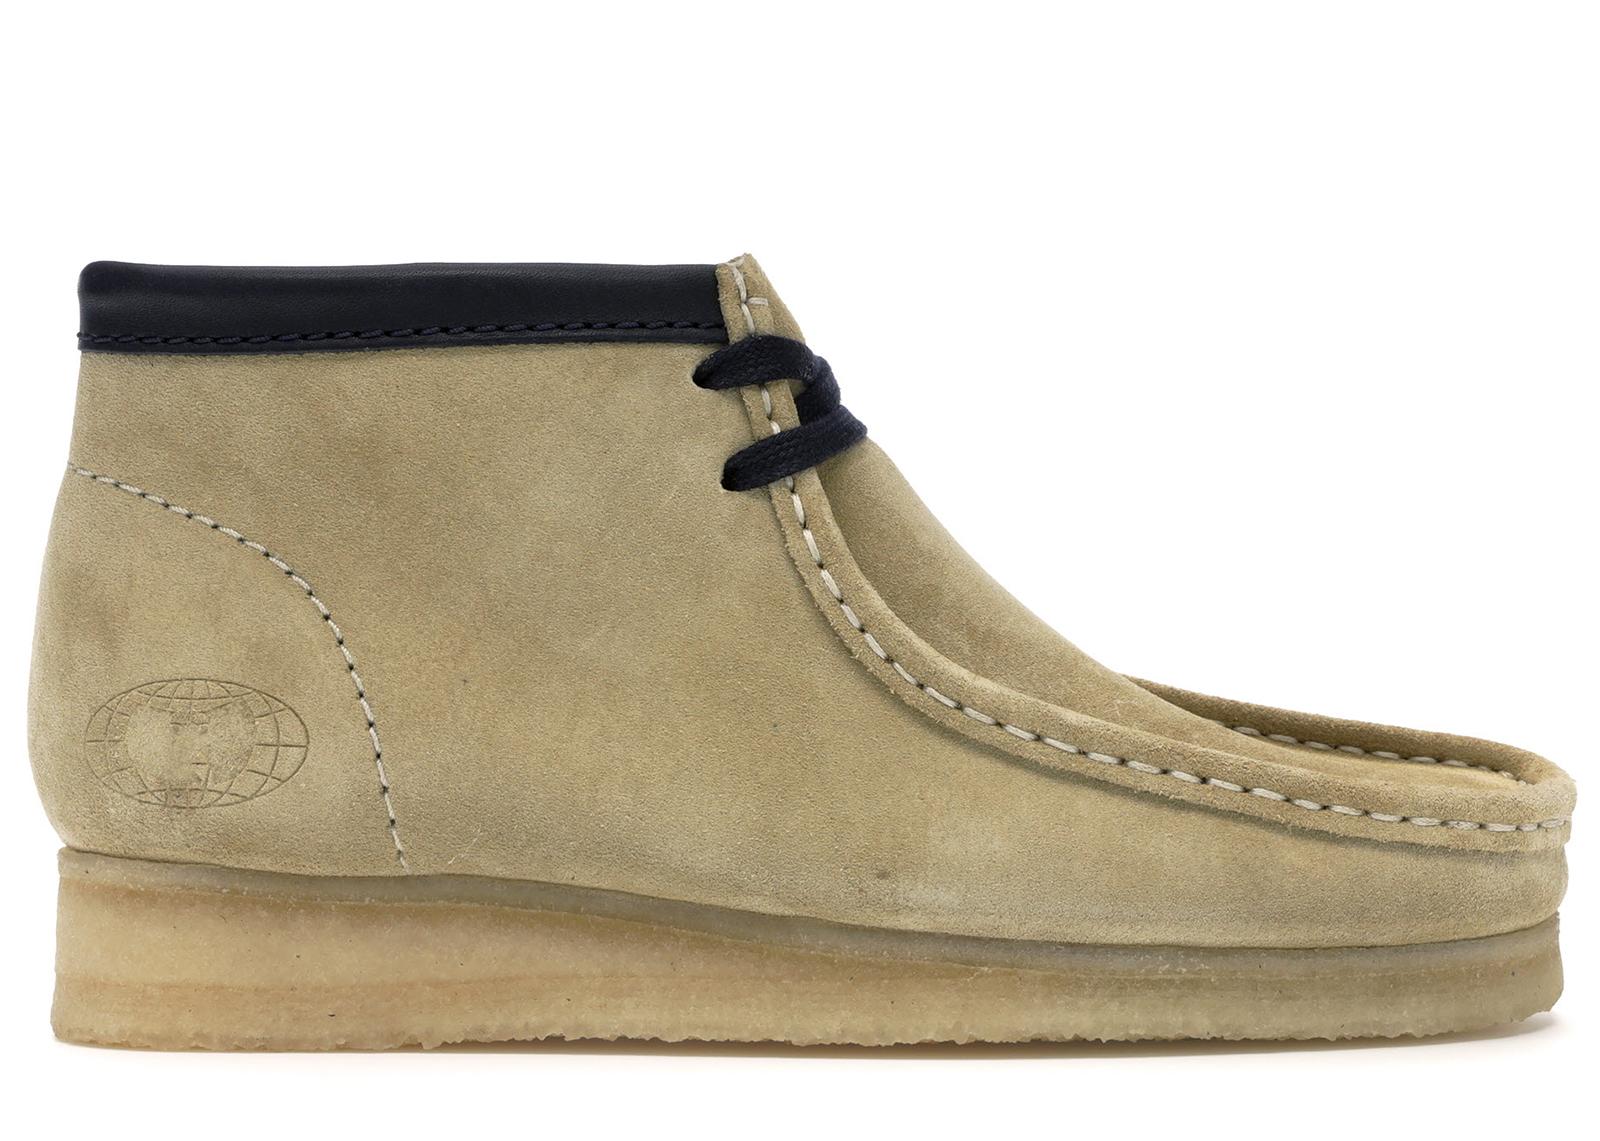 Clarks Wallabees Wu-tang 36 Chambers 25th Anniversary Maple for Men - Lyst